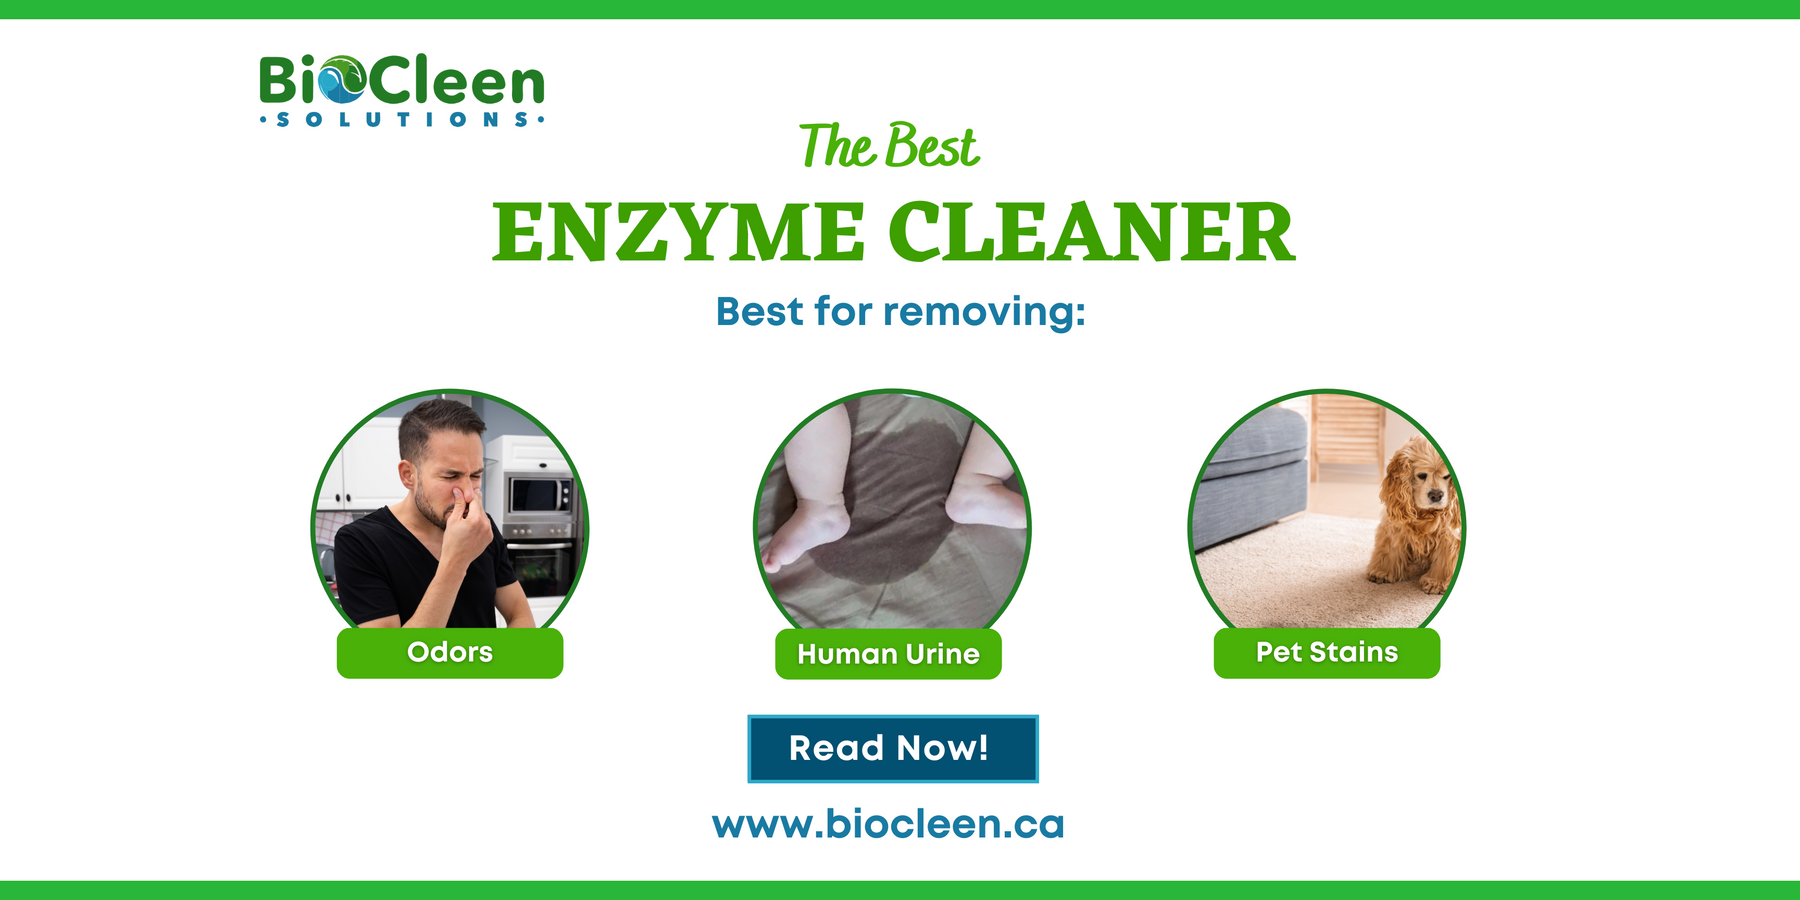 Best enzyme cleaner for pet stains, odors and human urine